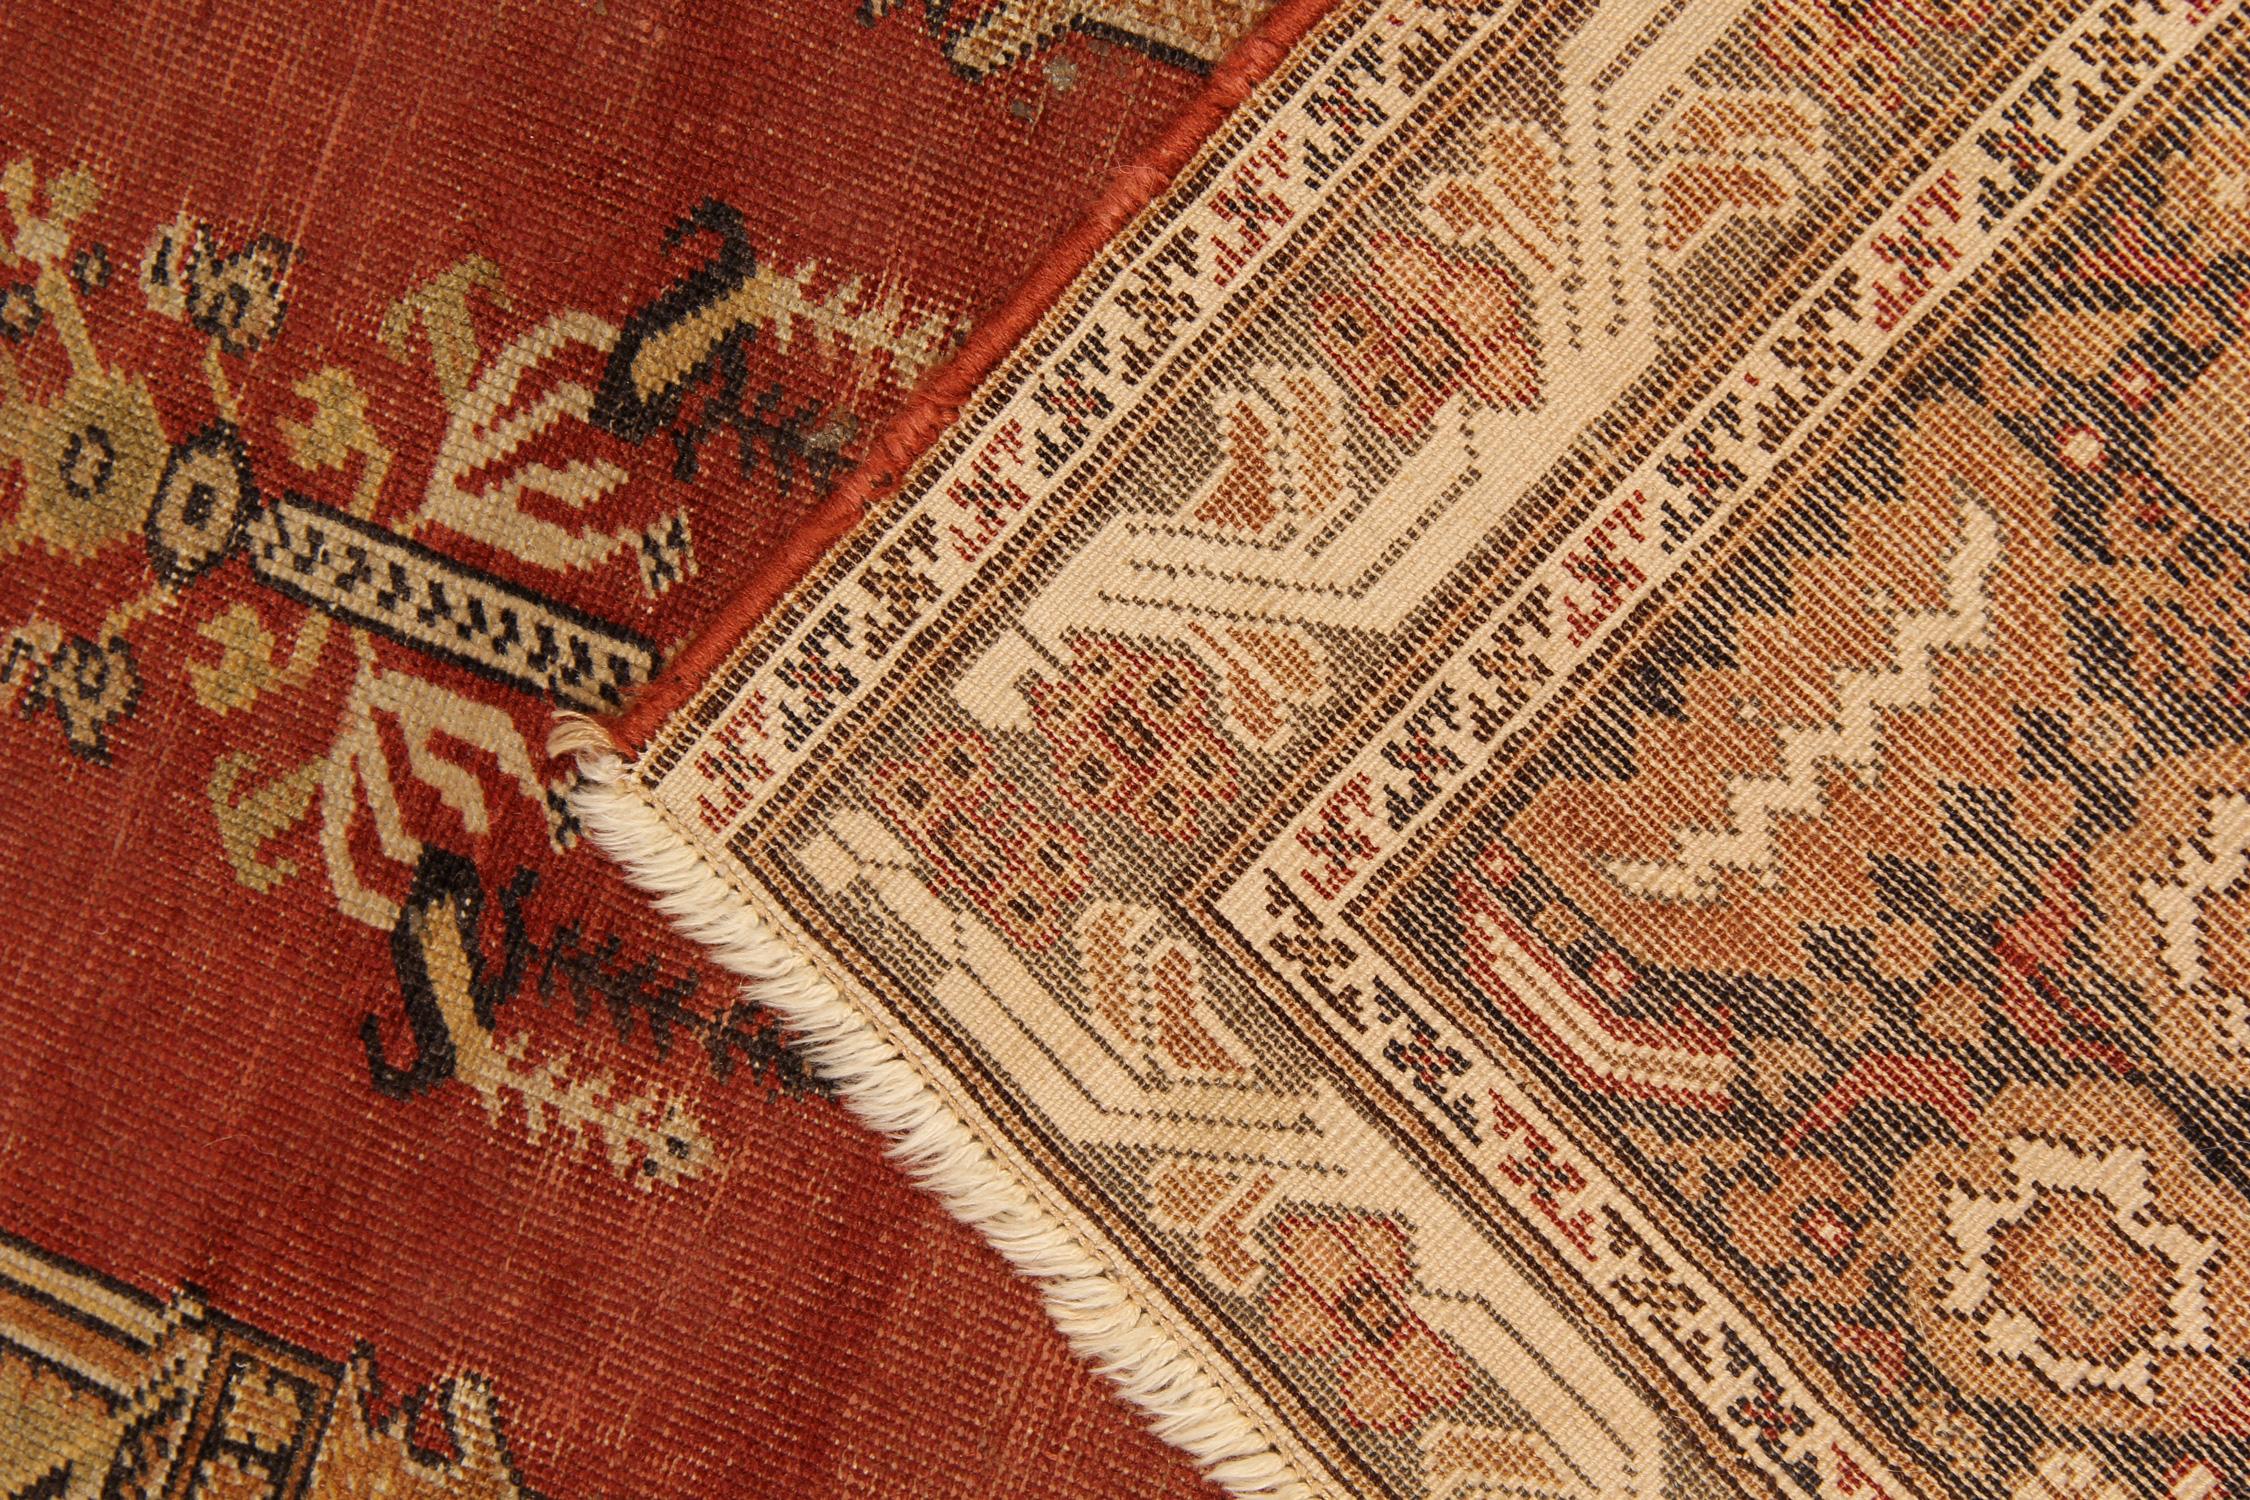 Hand-Crafted Red Antique Rugs, Traditional Carpet Turkish Rug, Mihrabi Living Room Rug For Sale